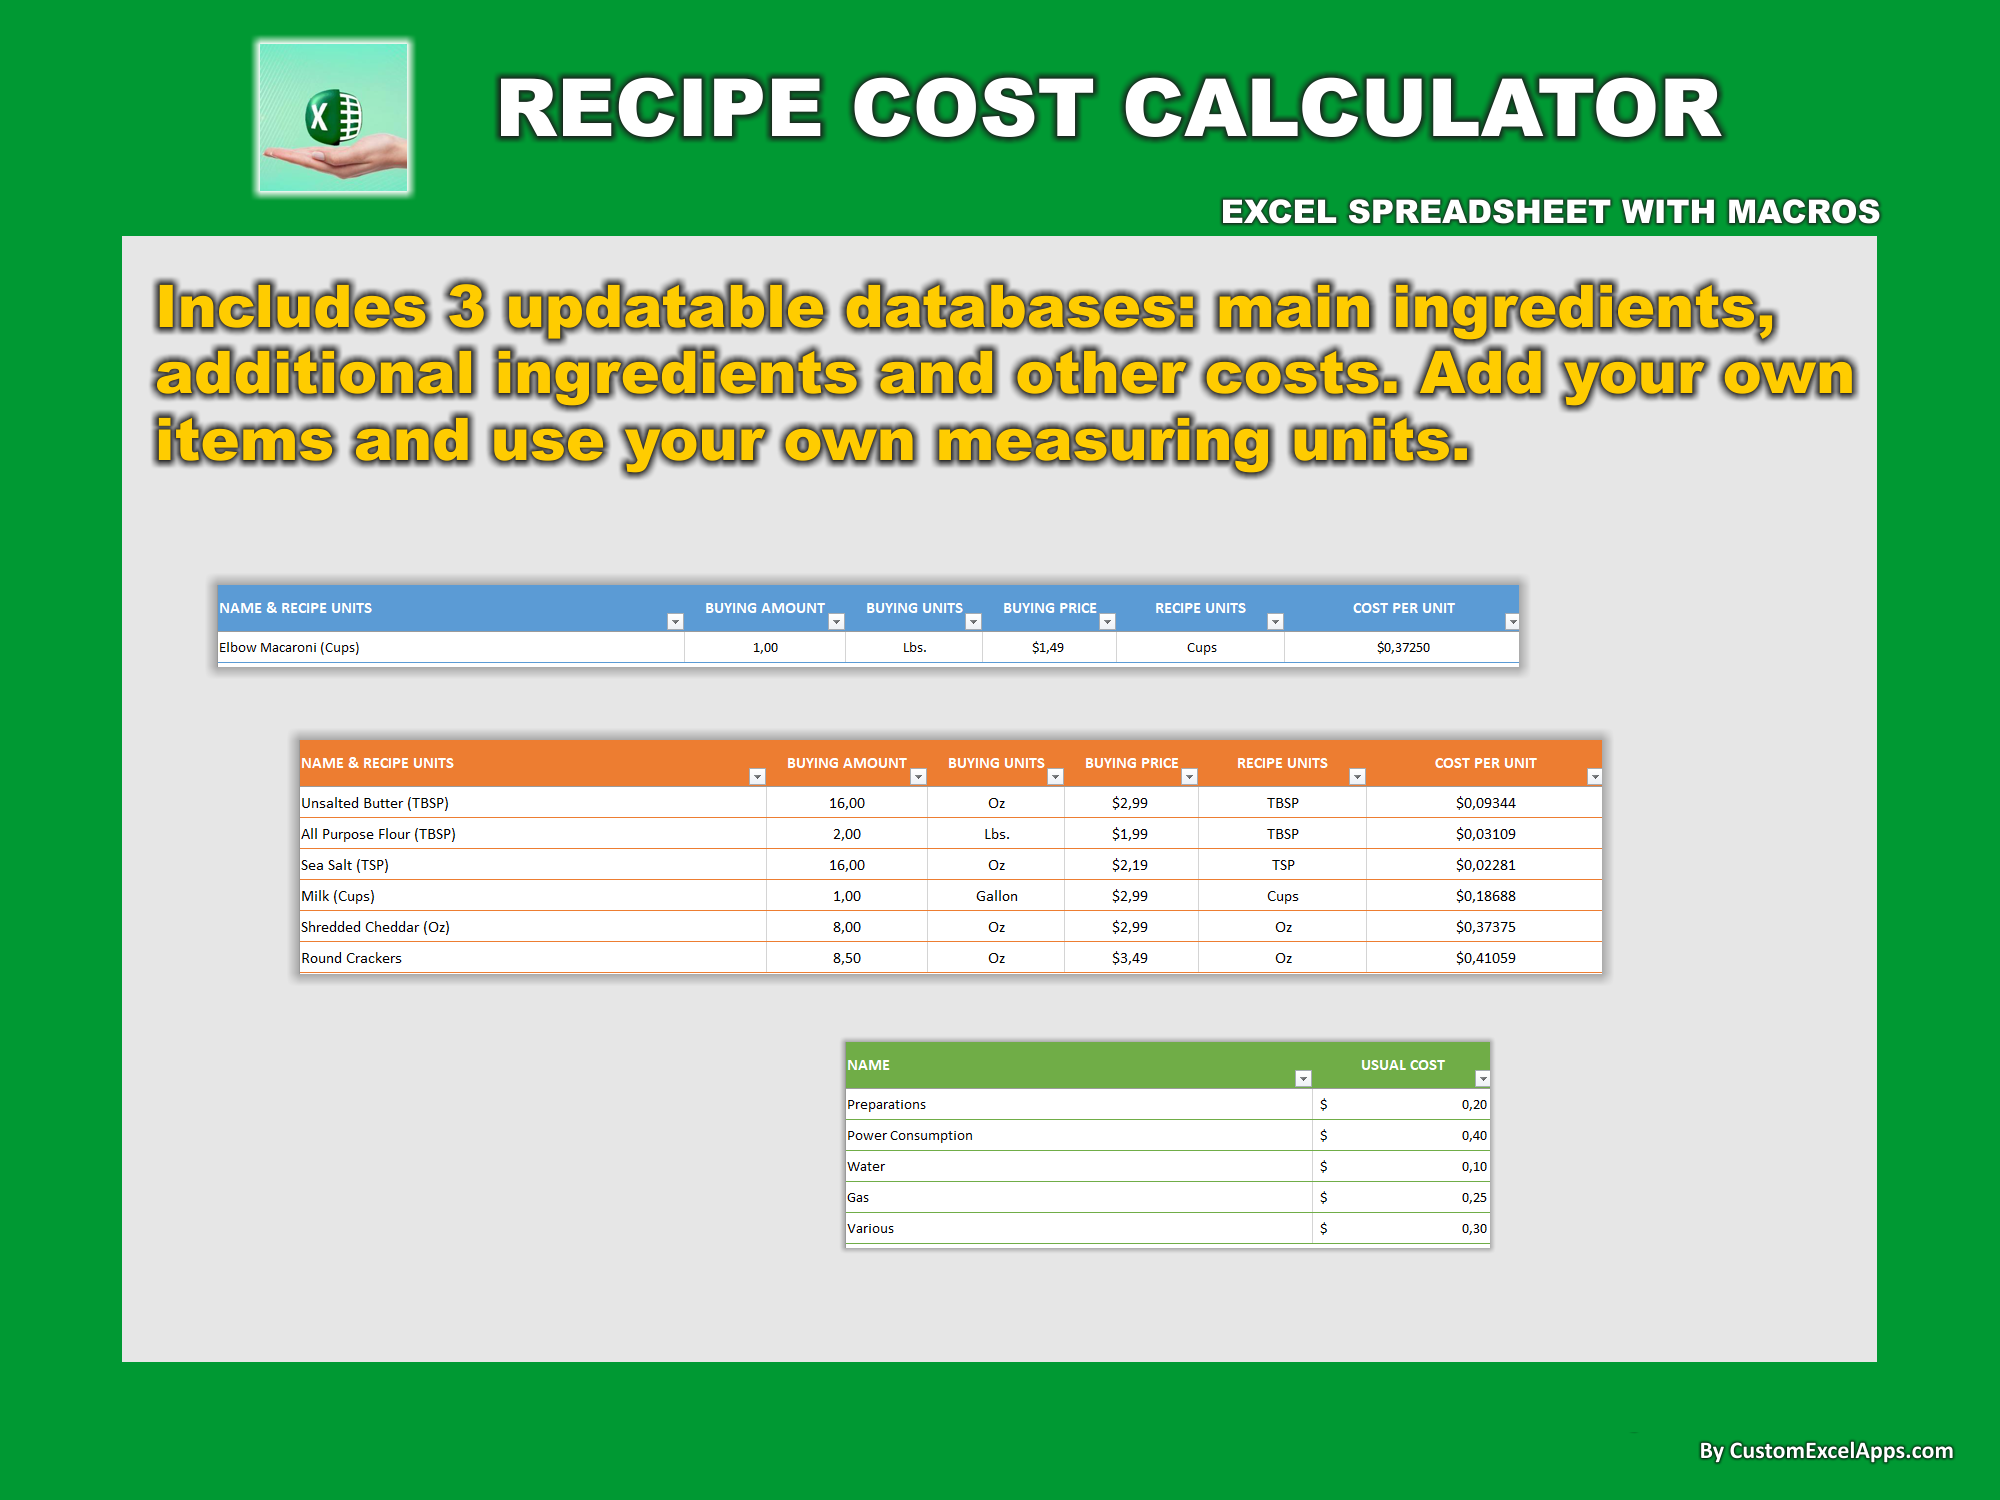 Recipe Costing Excel Spreadsheet For amateur and professional cooks